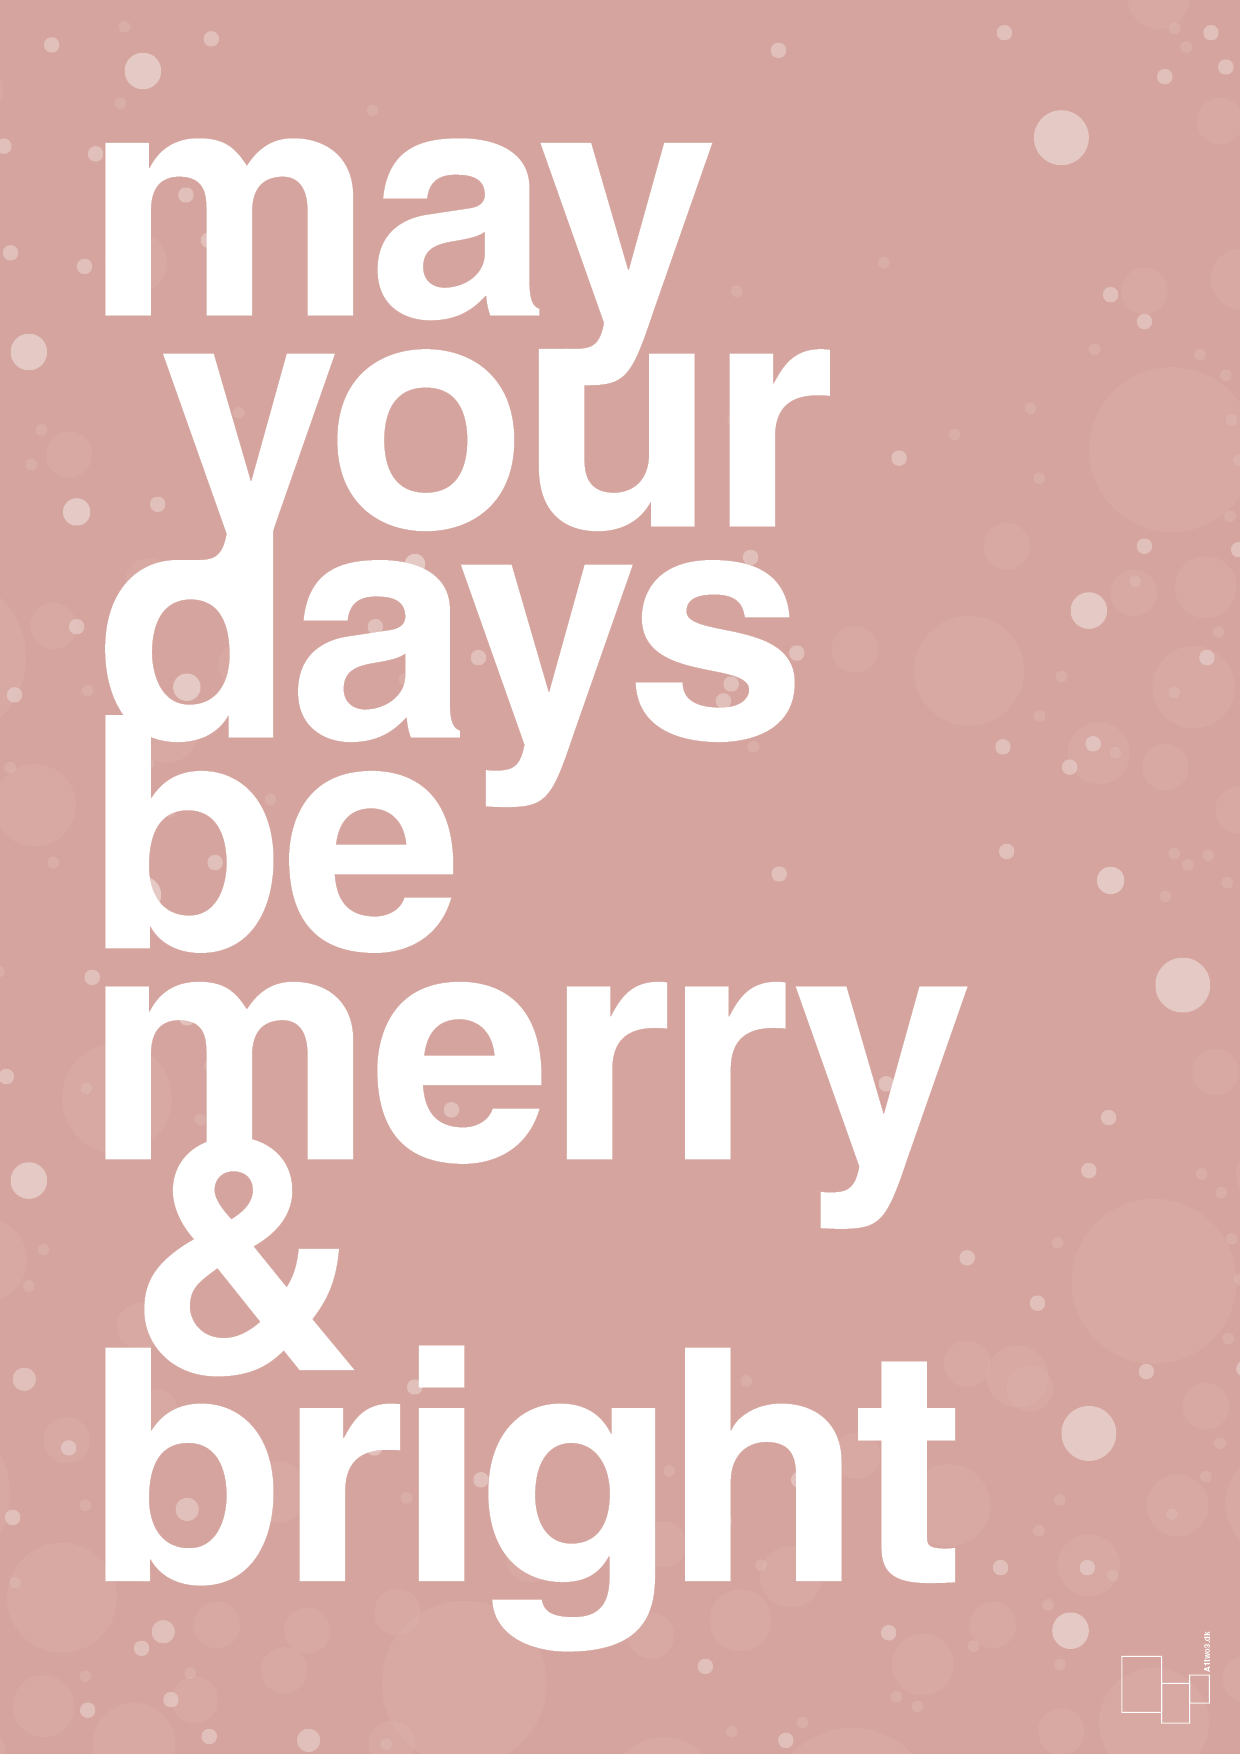 may your days be merry and bright - Plakat med Begivenheder i Bubble Shell